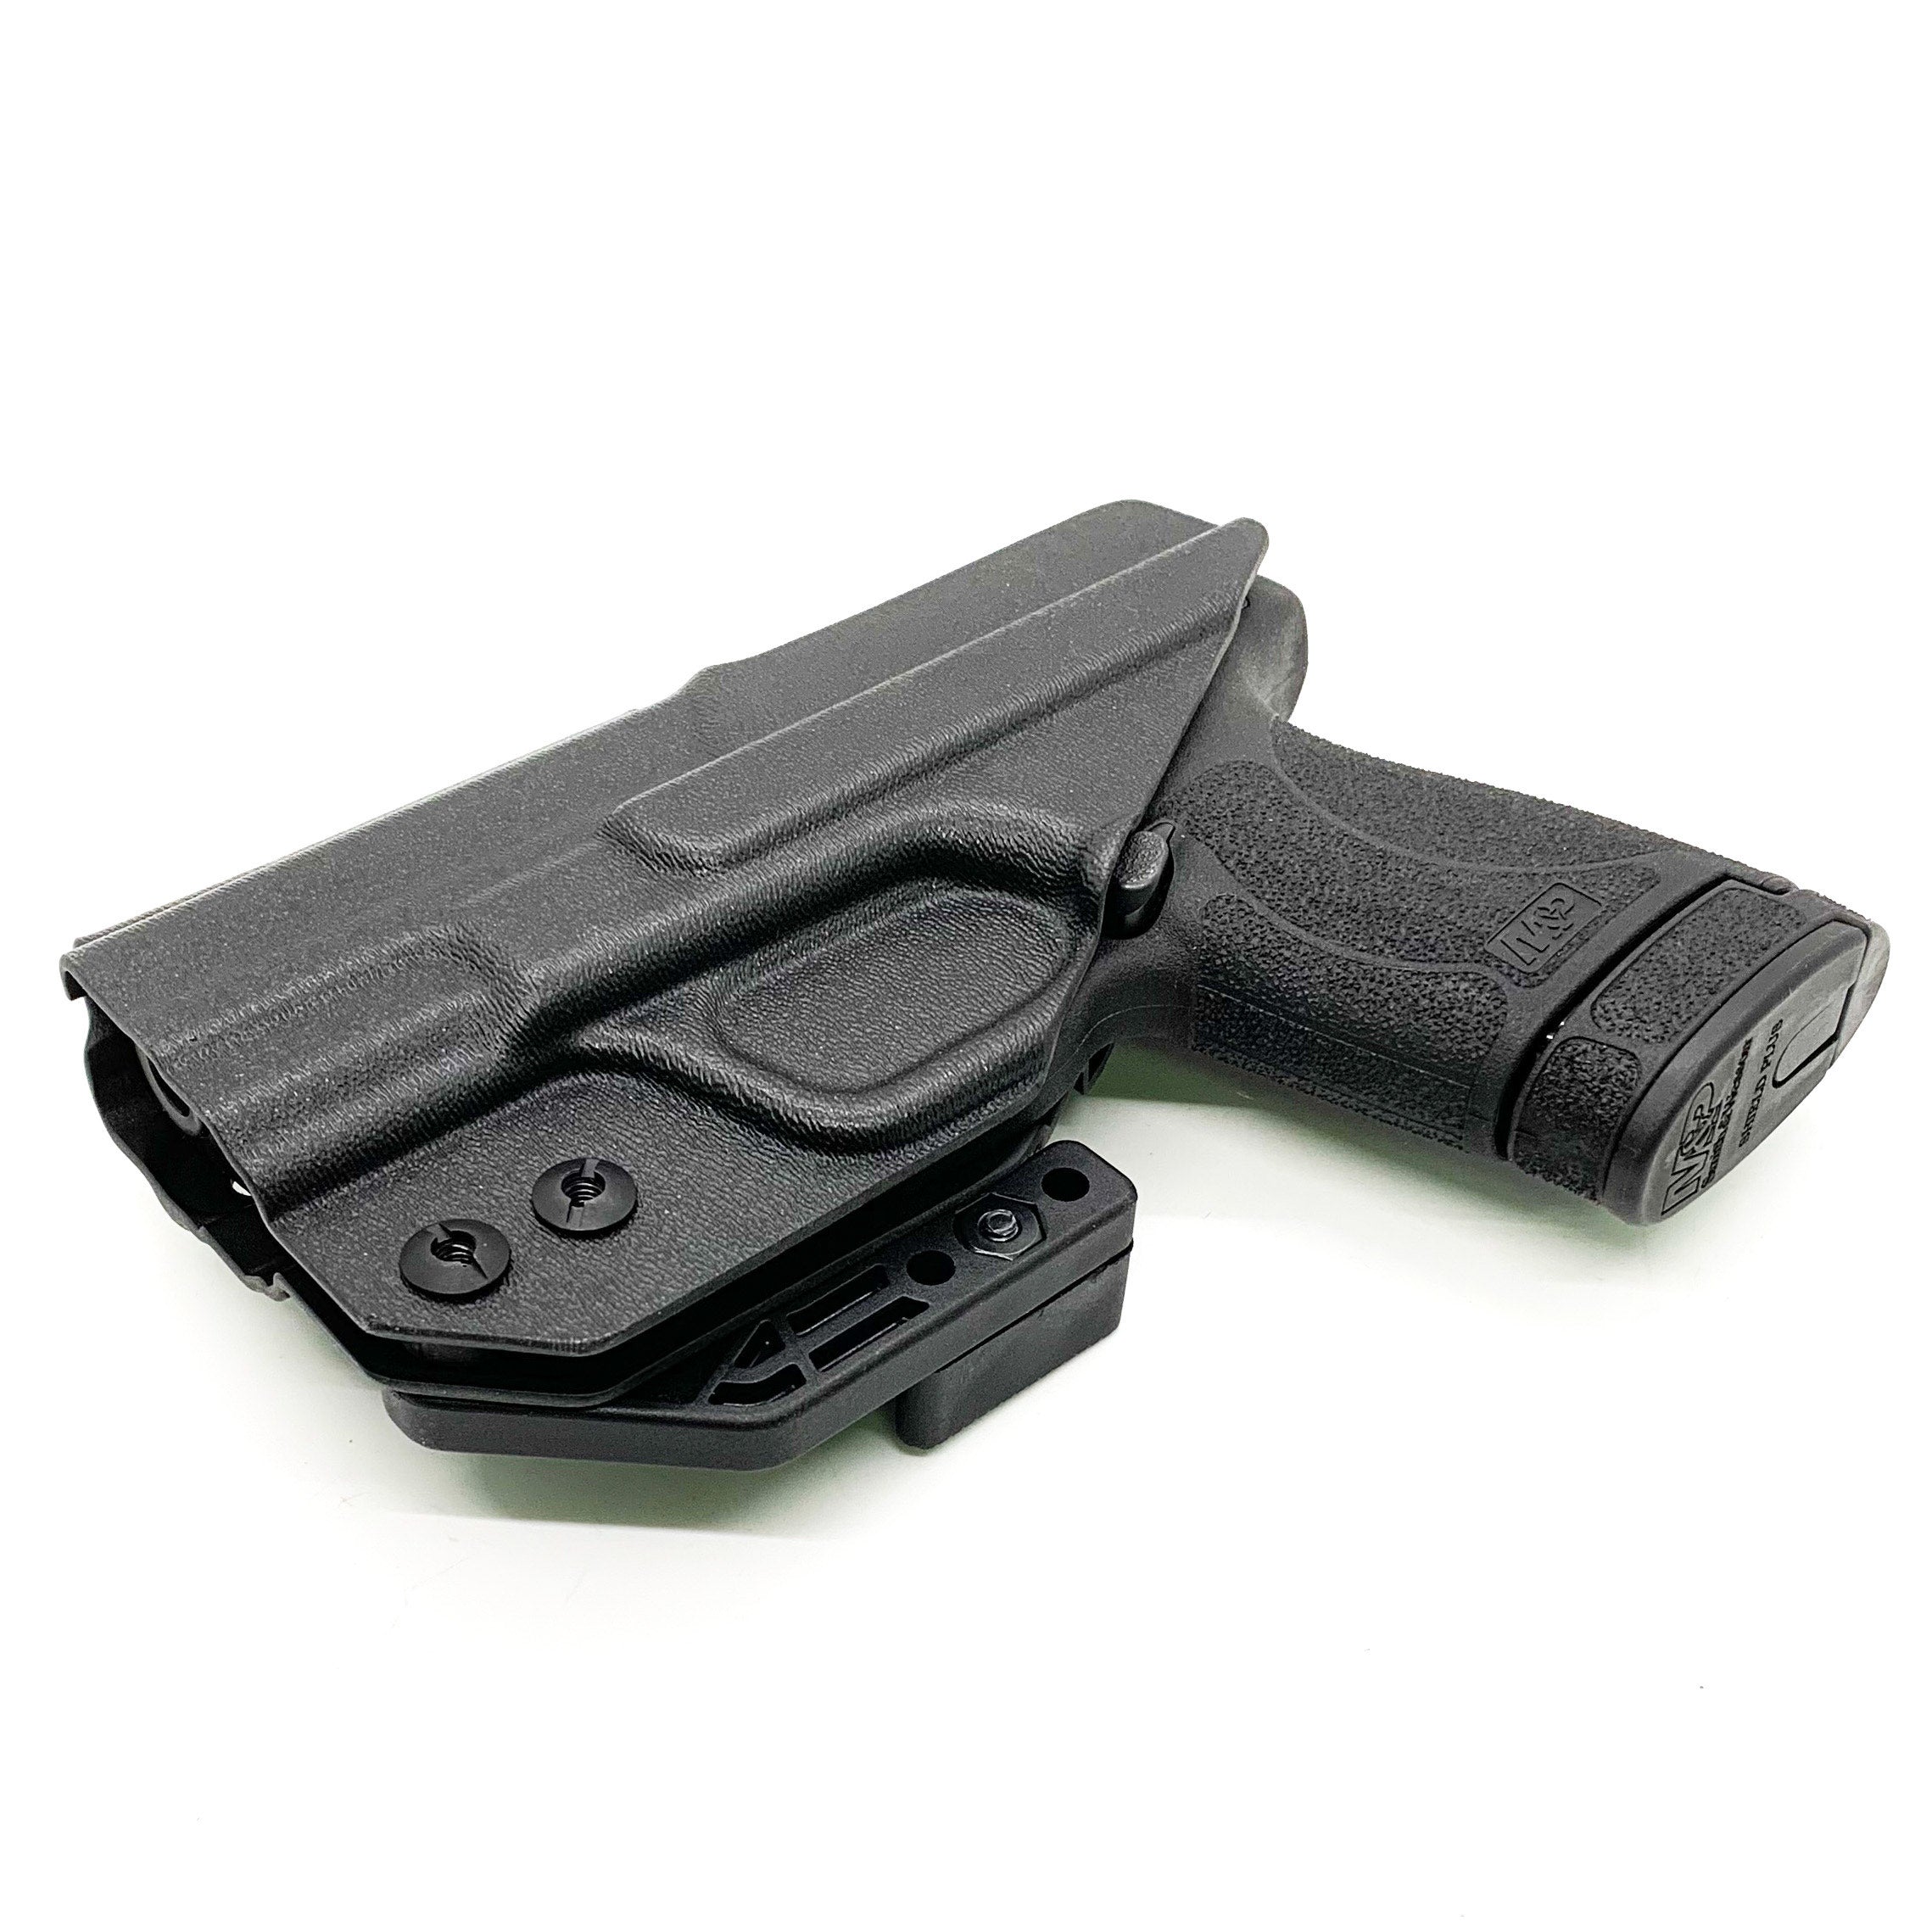 For the 2022 BEST Inside Waistband IWB AIWB Kydex Holster designed to fit the Smith and Wesson S&W Shield Plus handgun, shop Four Brothers Holsters.  Full sweat guard, adjustable retention, minimal material, & smooth edges to reduce printing. Made in the USA. Open muzzle for threaded barrel, cleared for red dot sights.